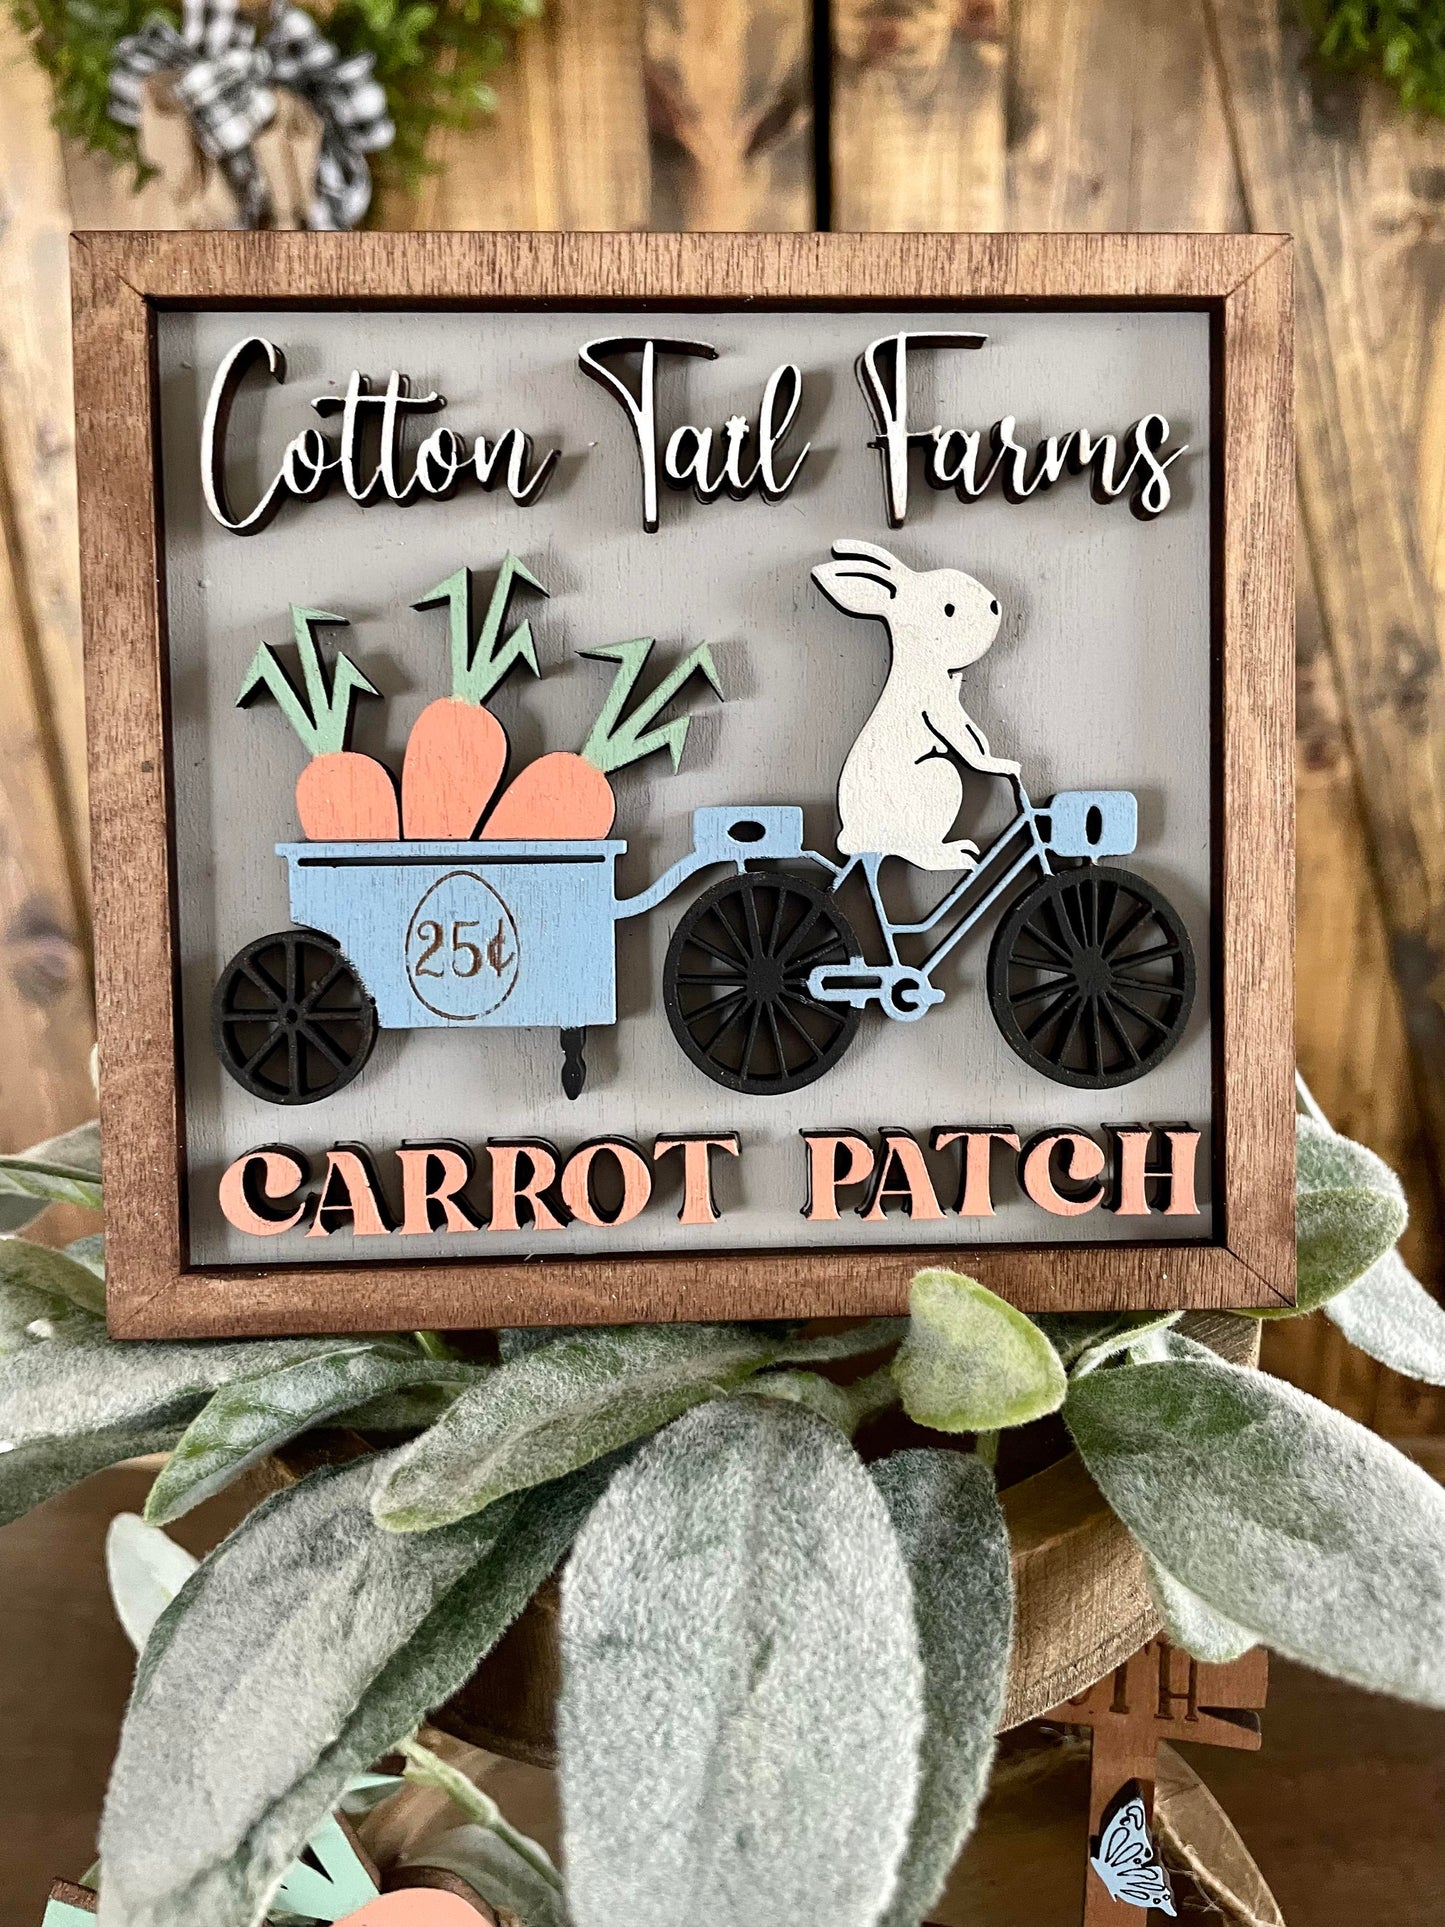 3D Tiered Tray Decor - Cotton Tail Farms